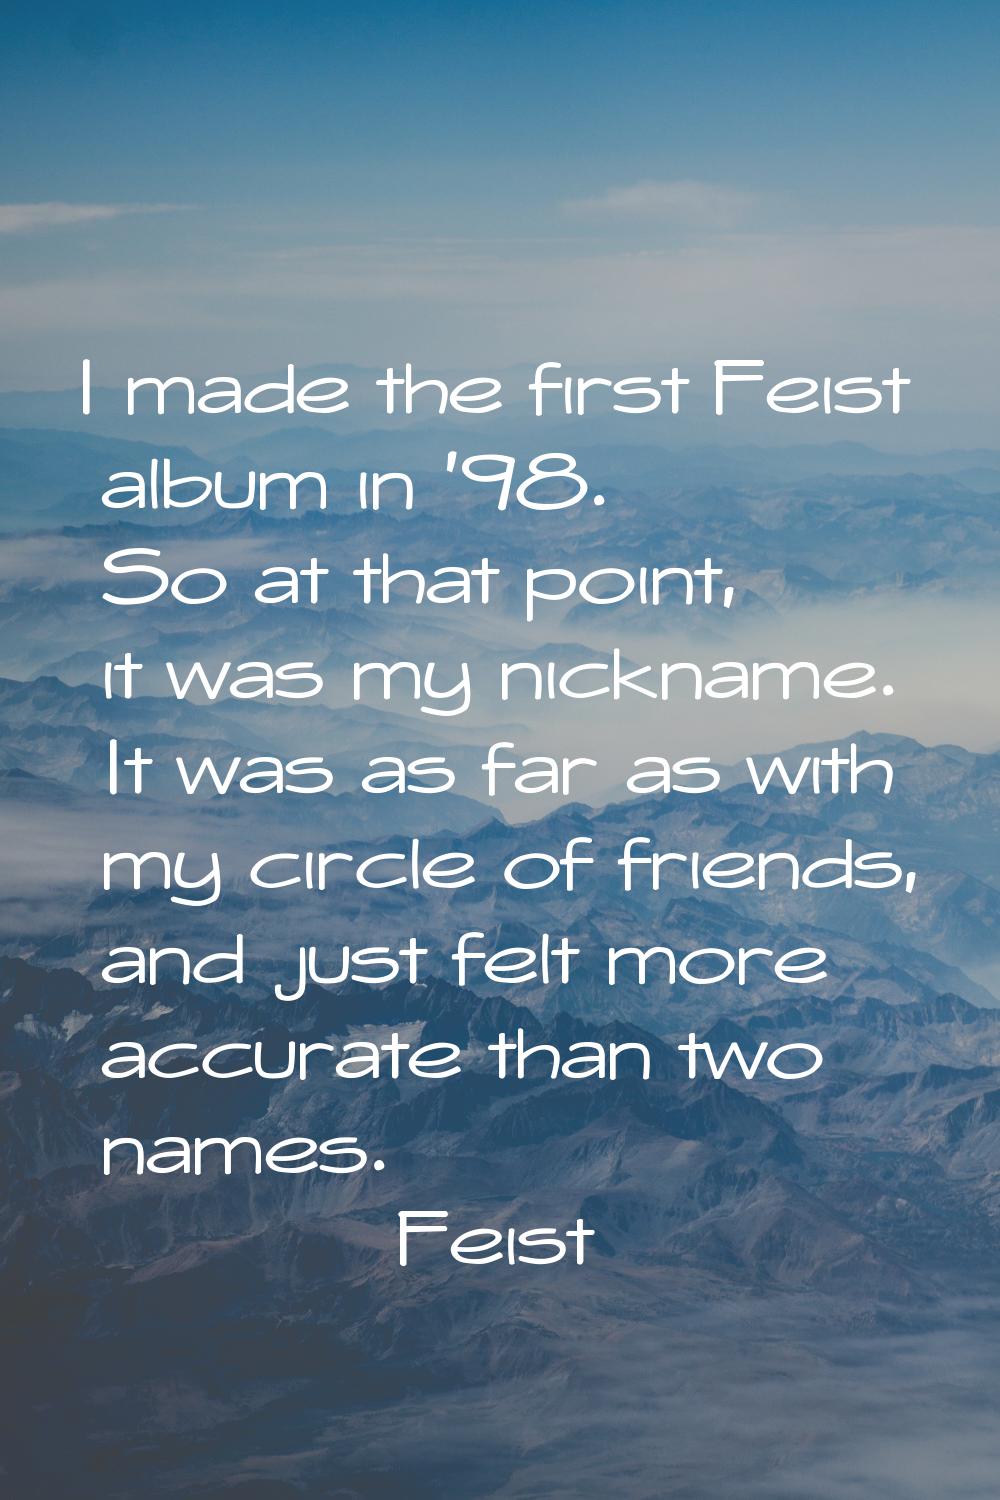 I made the first Feist album in '98. So at that point, it was my nickname. It was as far as with my